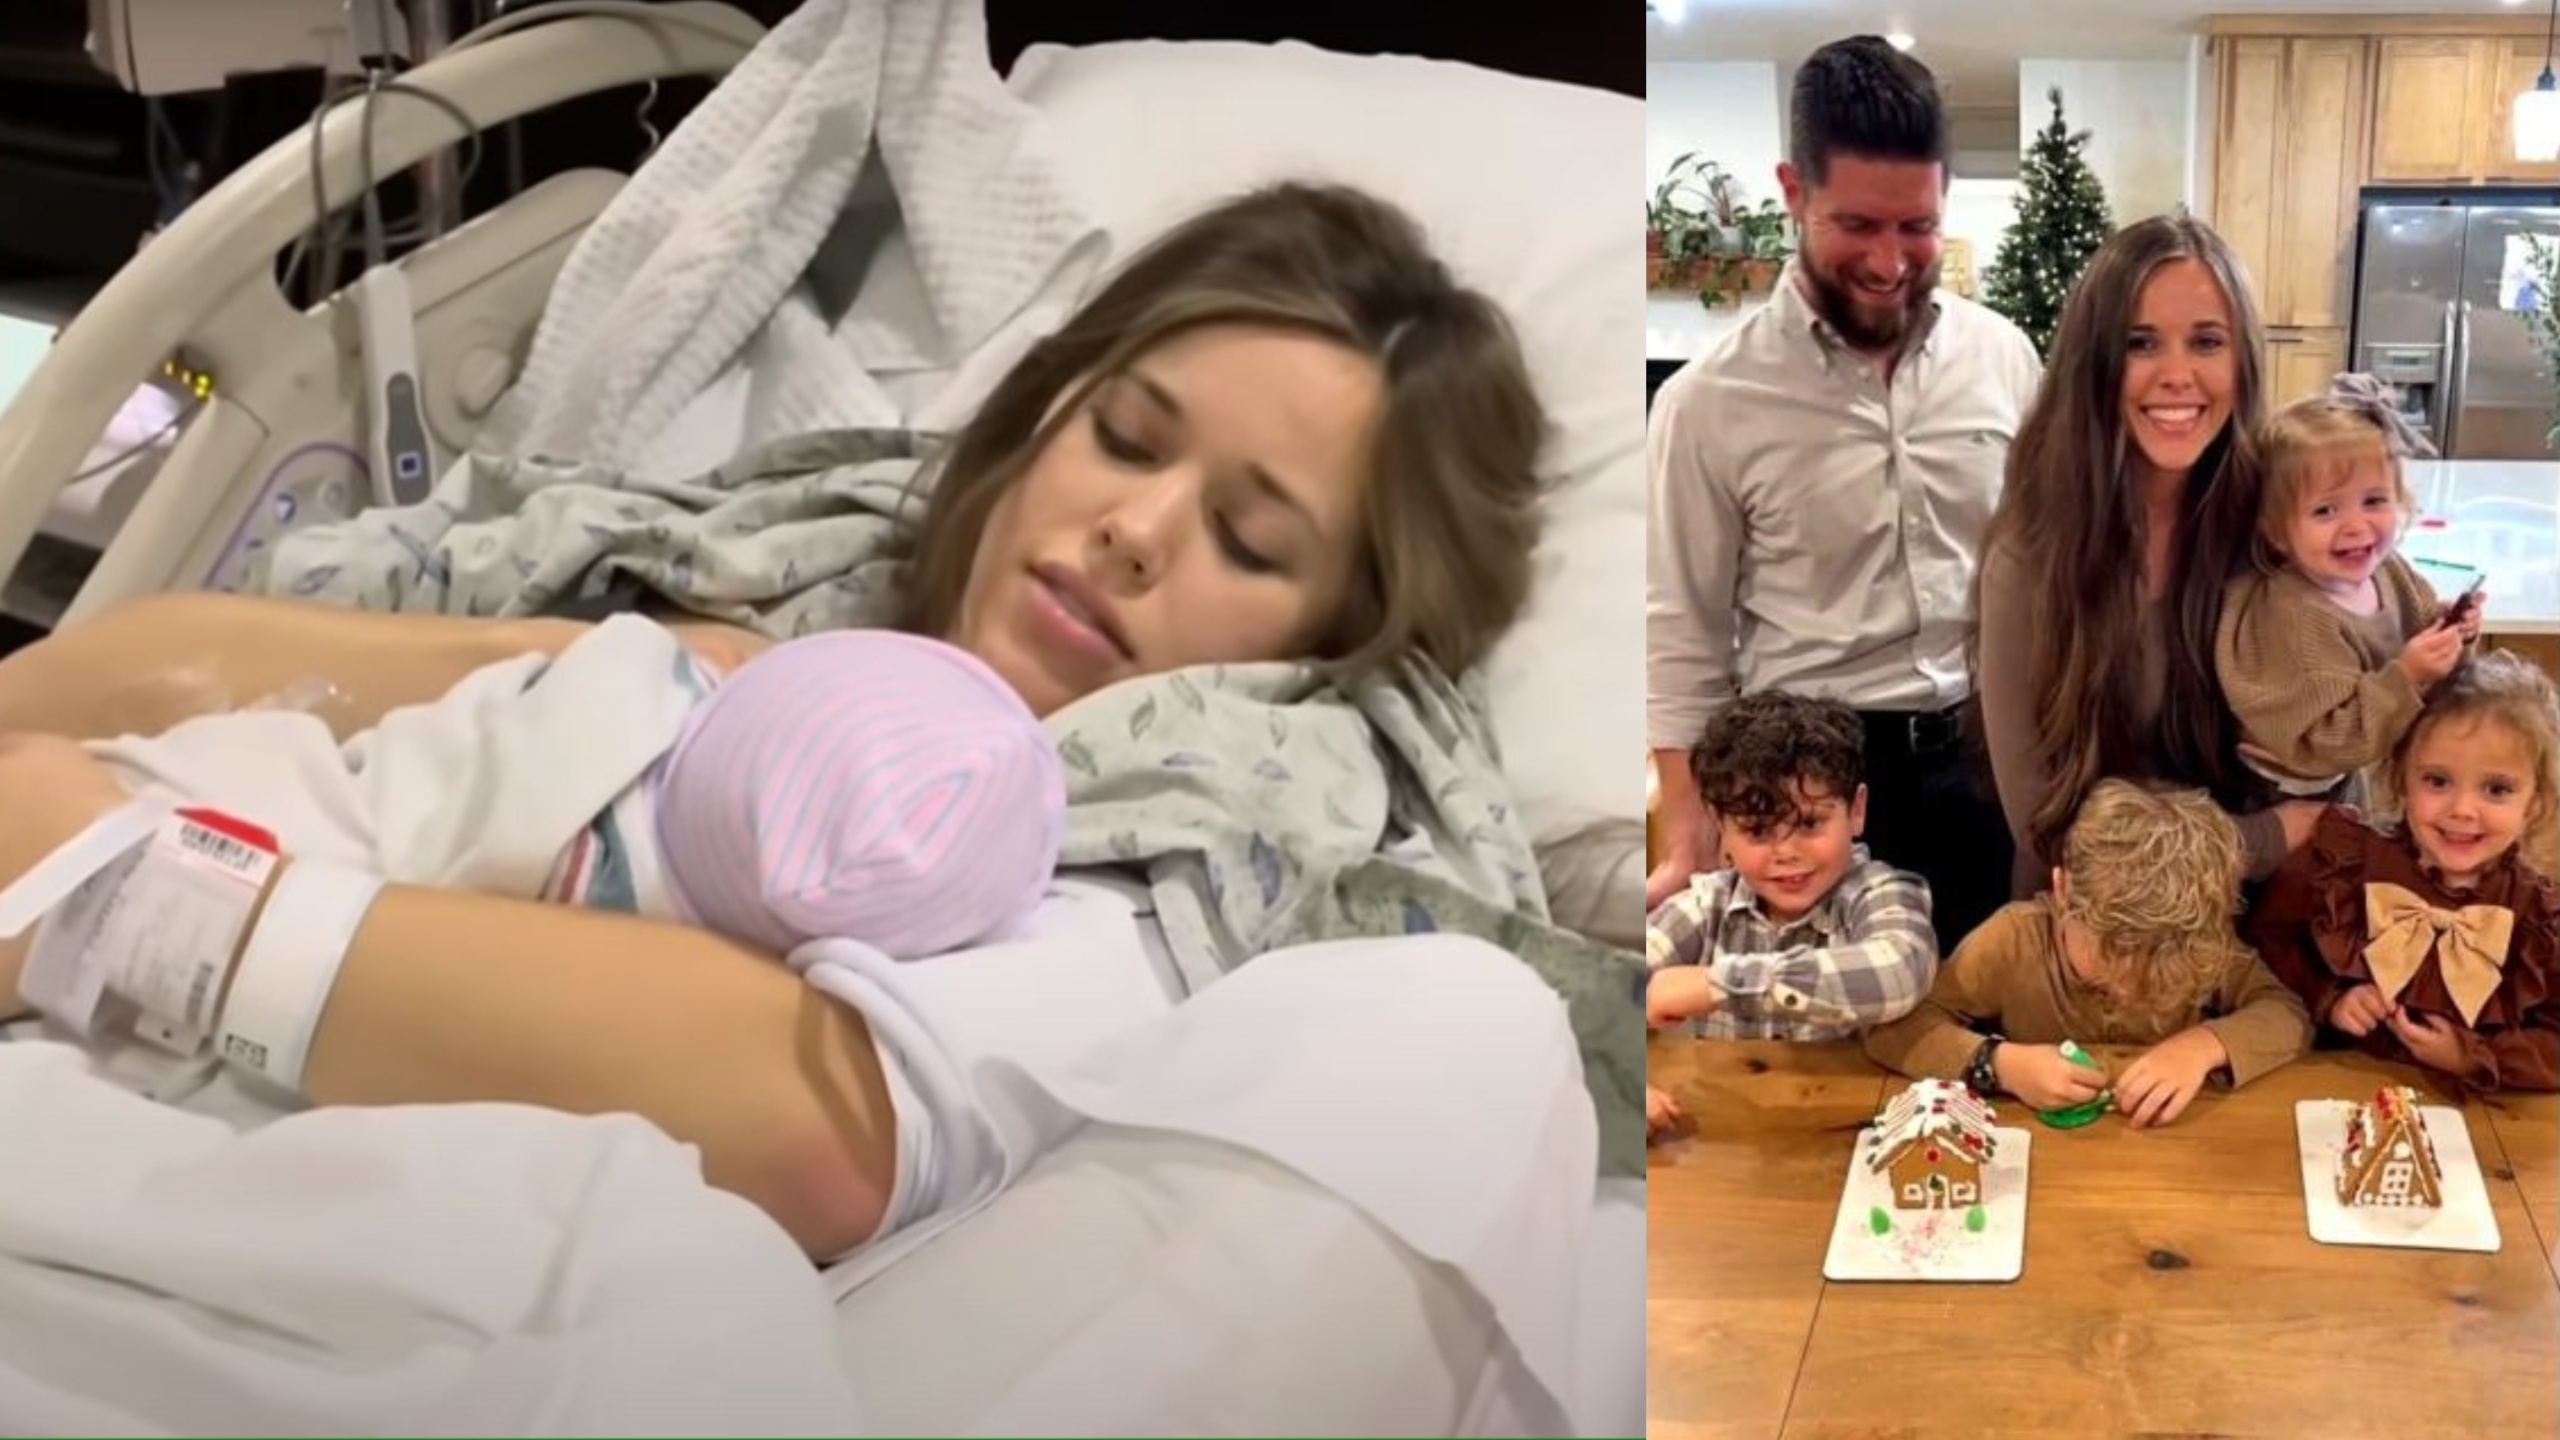 Jessa Duggar poses with her new baby.